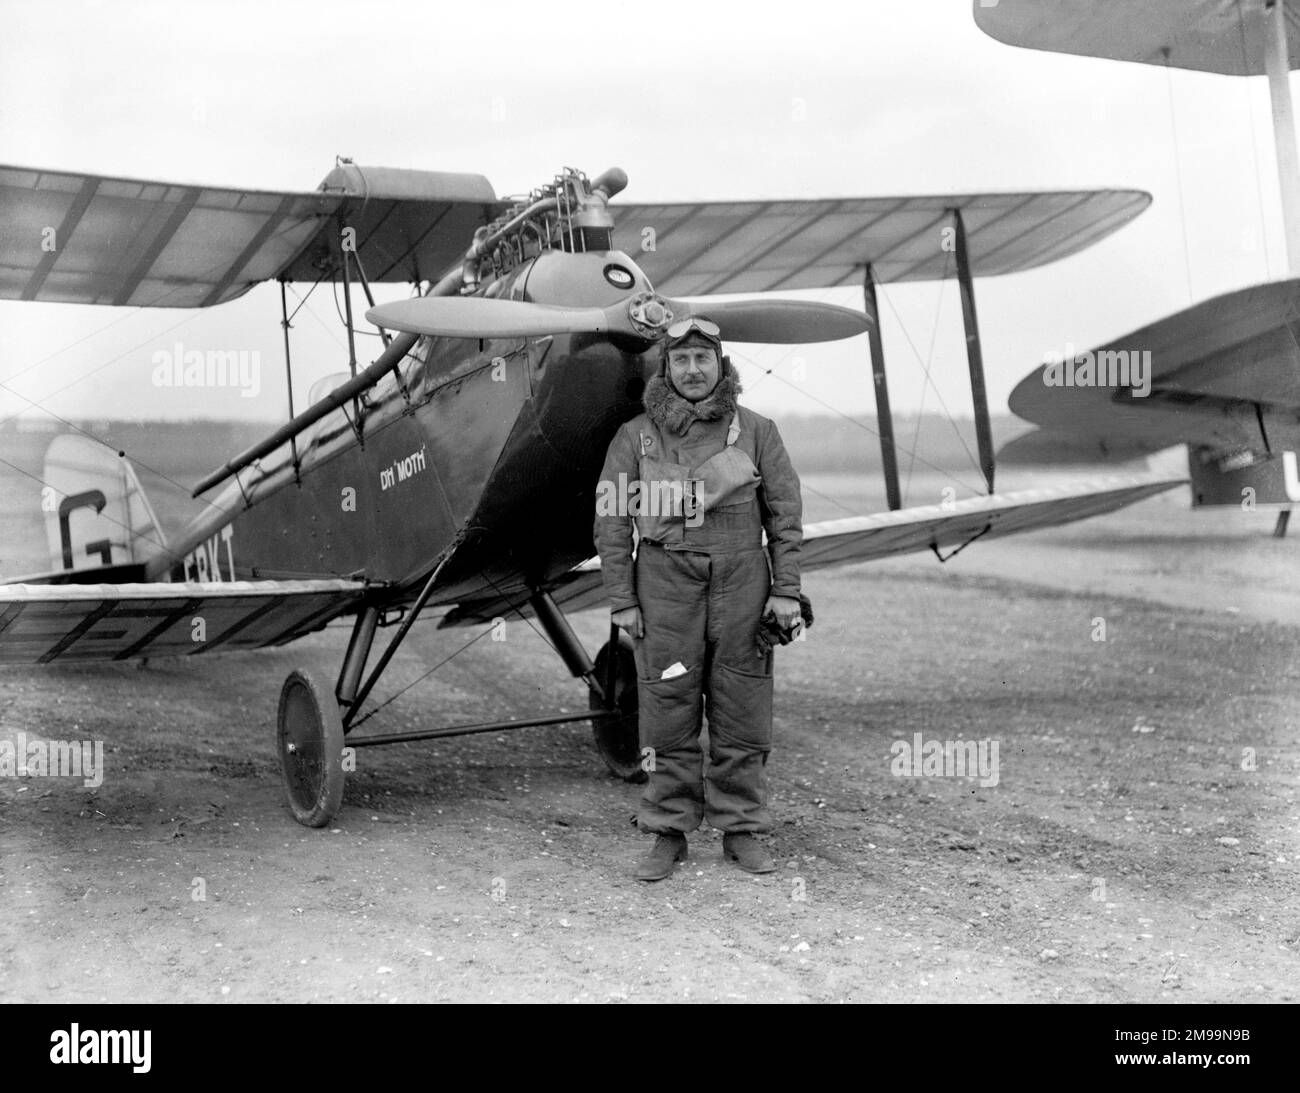 Sir Alan John Cobham (1894û1973) - English aviation pioneer standing in front of  his de Havilland DH.60 Moth G-EBKT, a light-weight, two-place, single-engine, single-bay British two-seat touring and training biplane aircraft. A prototype which Cobham flew from Croydon to Zurich and back in 14 hours, 49 minutes on 29th May 1925 (after which this photograph was likely taken). Cobham also flew the Moth in The Kings Cup Air Race, though weather forced him to land short of the finish. It placed second in a follow-up race. The aircraft ended its days in a crash at Stanmore on 21 August 1927. Stock Photo